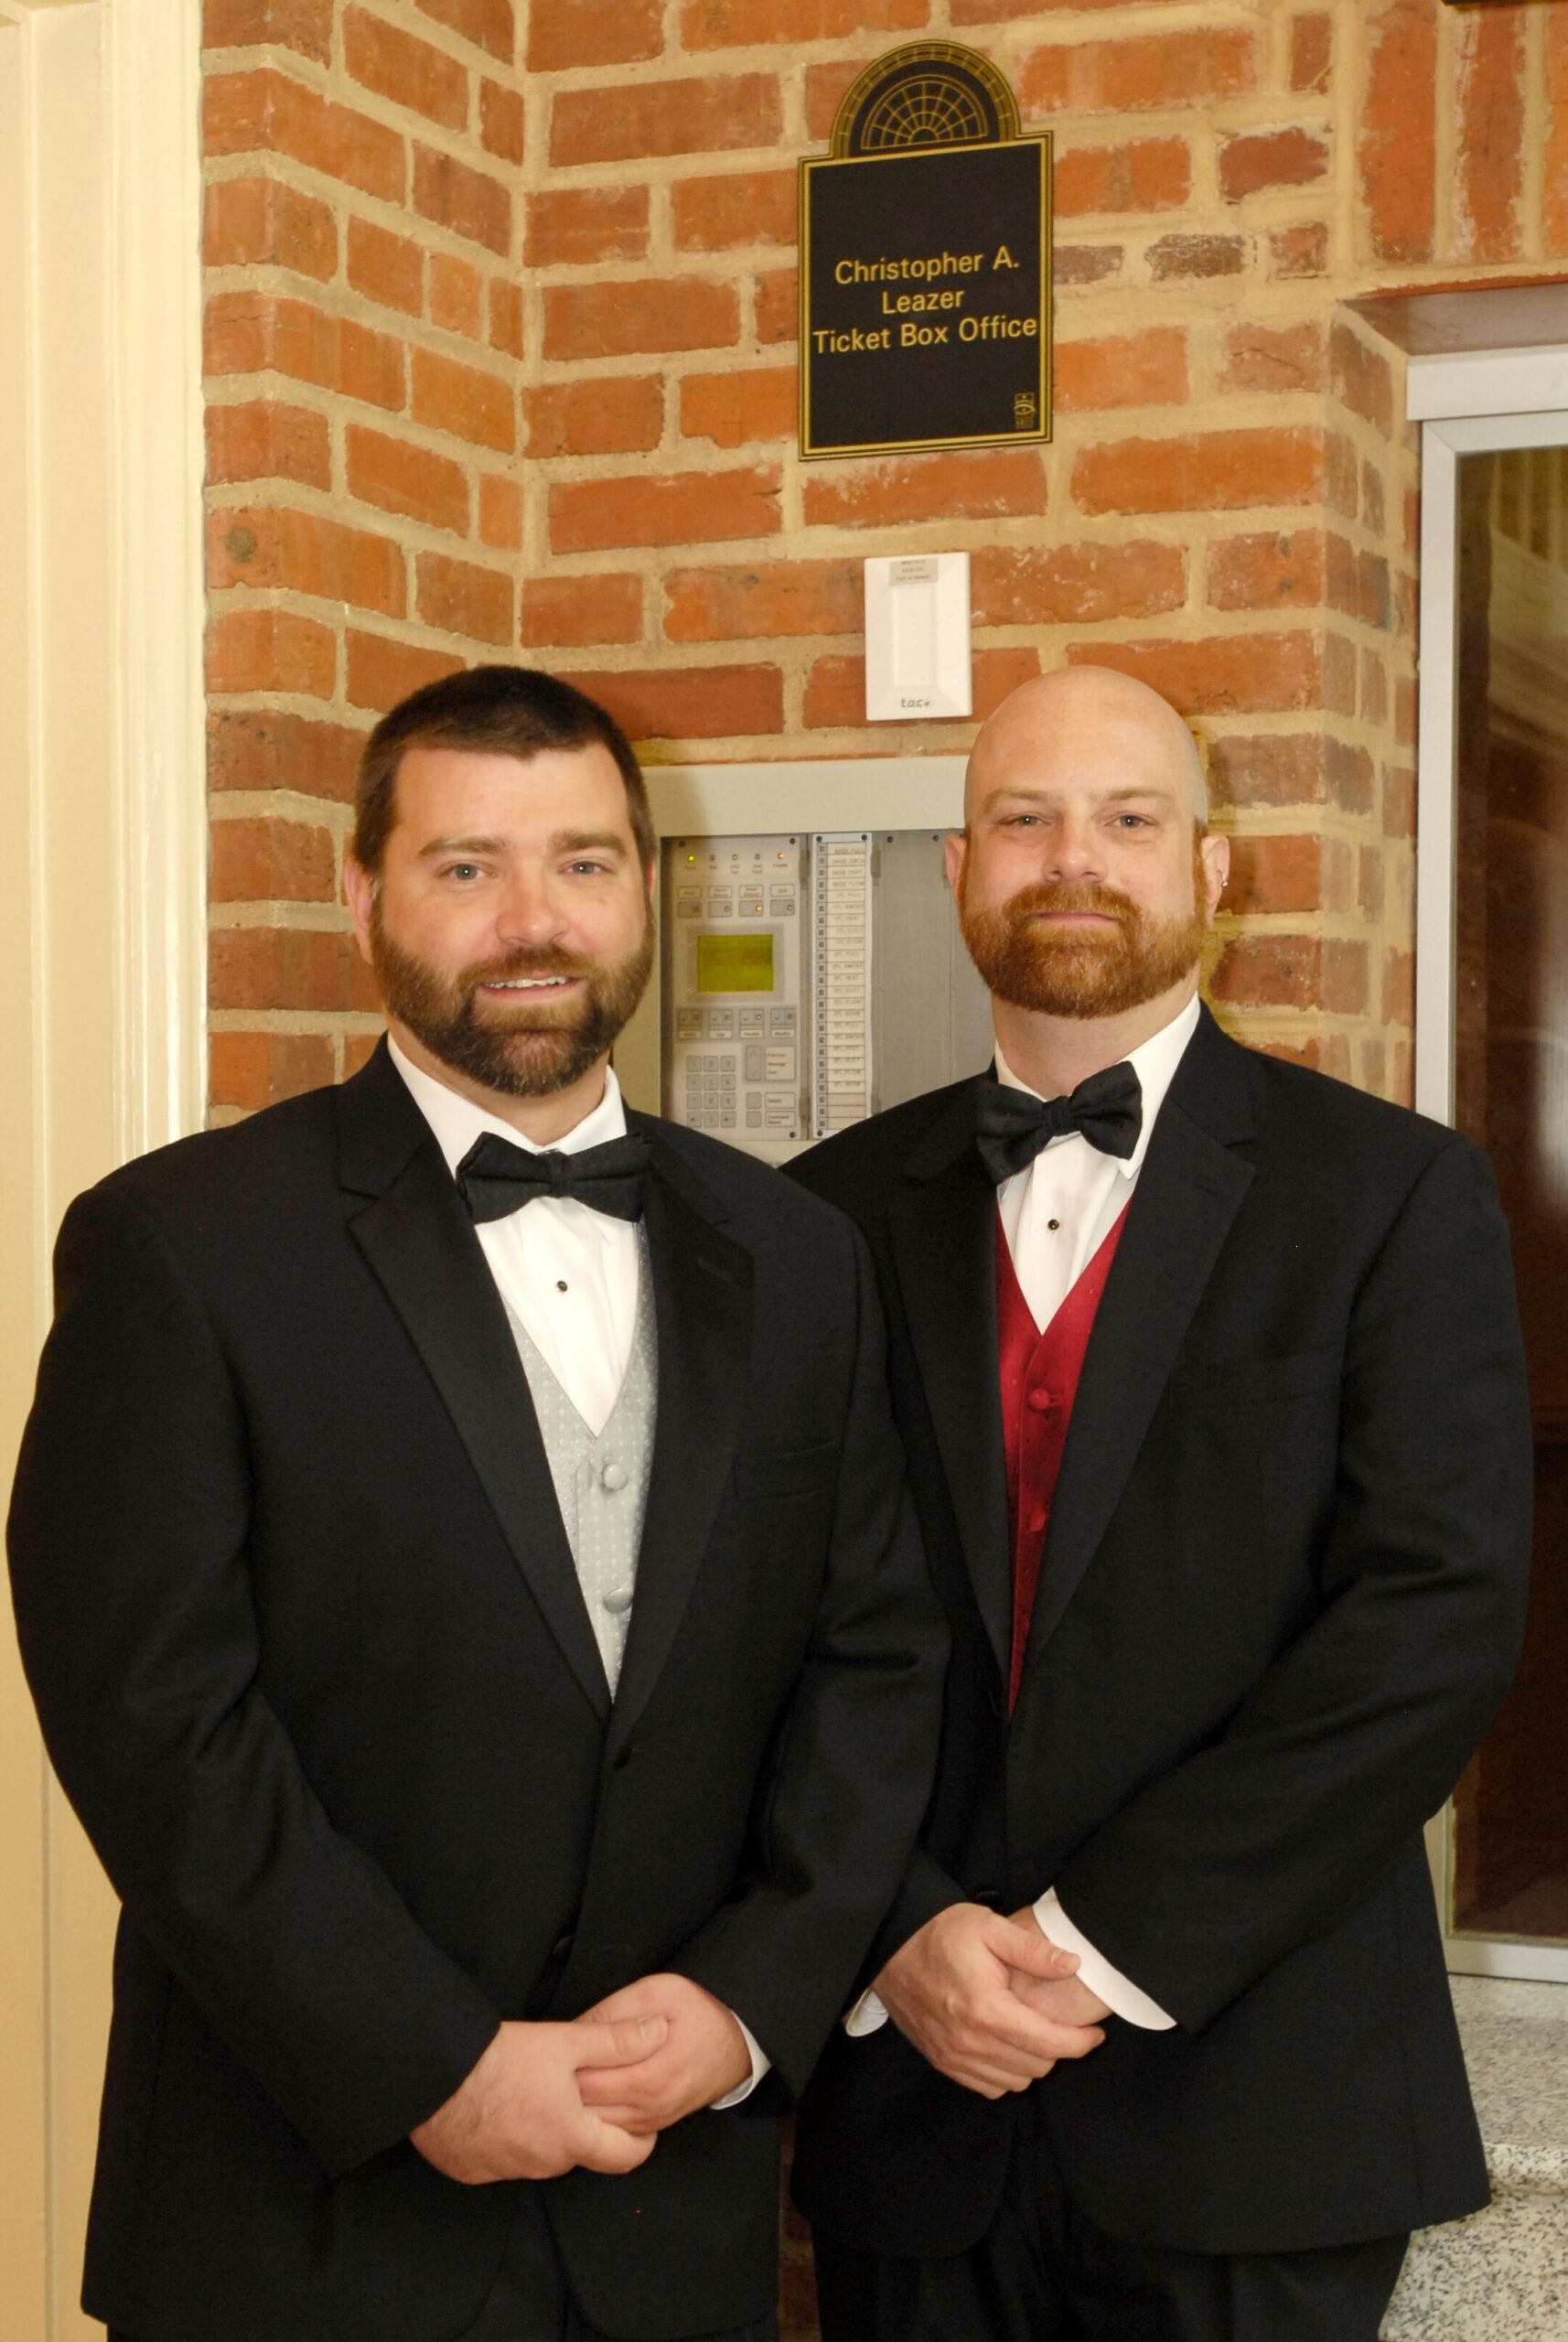 Ramsey and Leazer at the grand reopening gala for Thompson Hall in 2009, in front of the box office named after Leazer